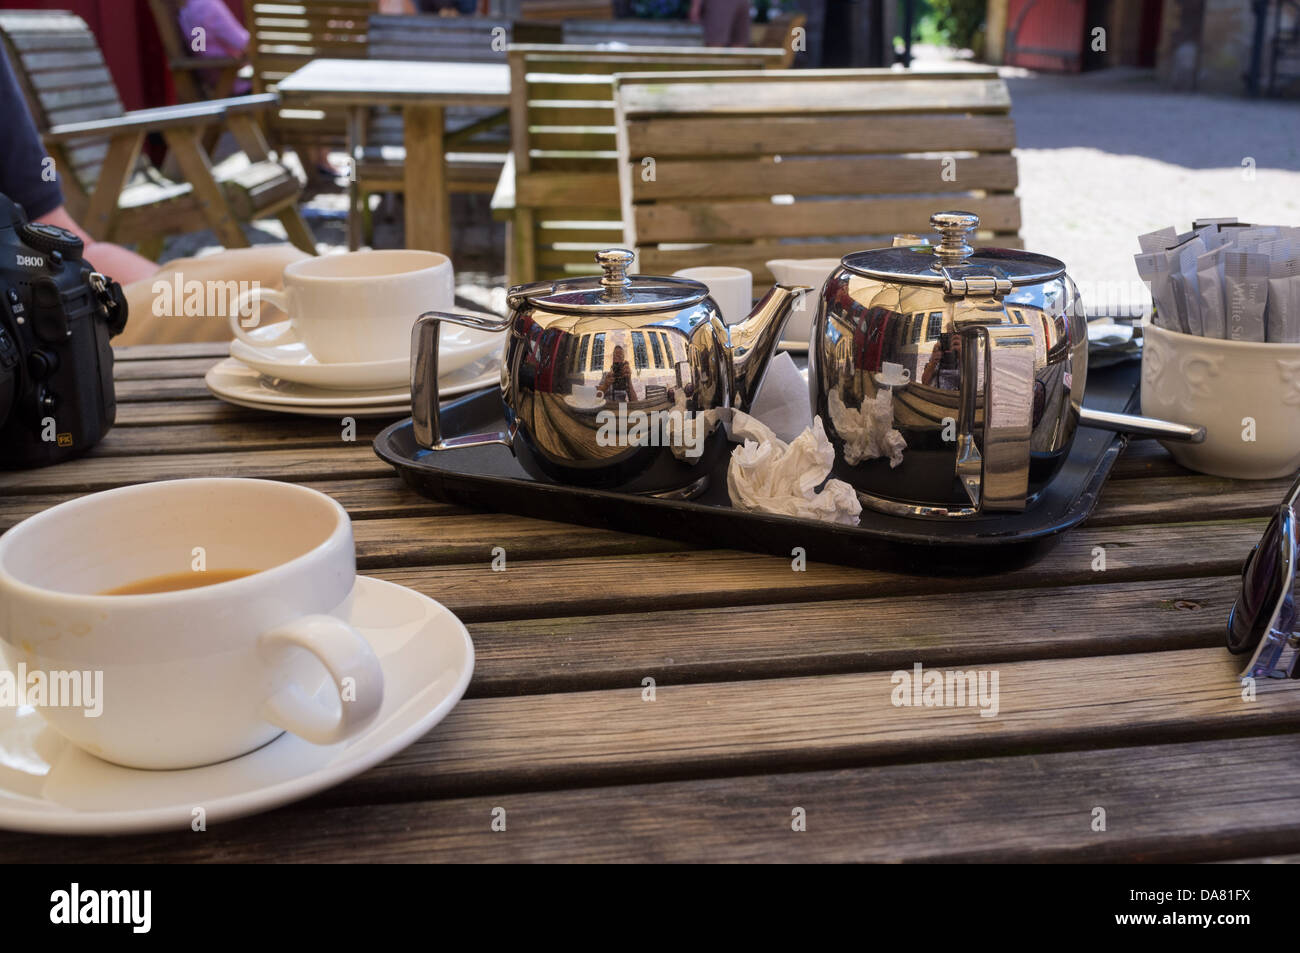 Bolham, Tiverton, Devon, UK. The remains of tea at the café in the stable block of Knightshayes Court. Stock Photo